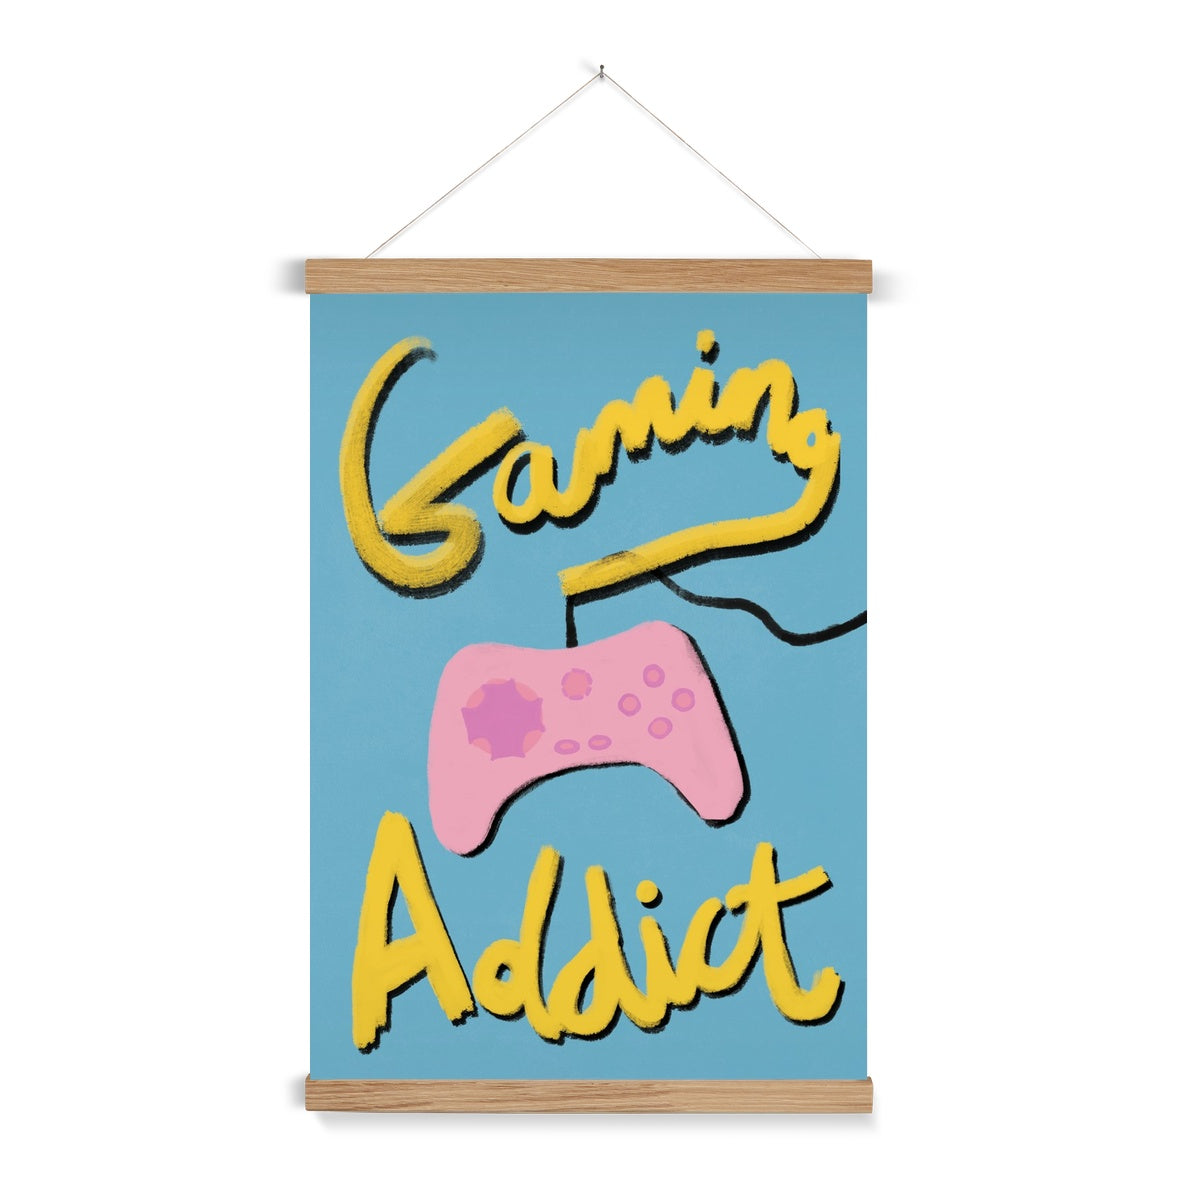 Gaming Addict Print - Blue, Yellow, Pink Fine Art Print with Hanger